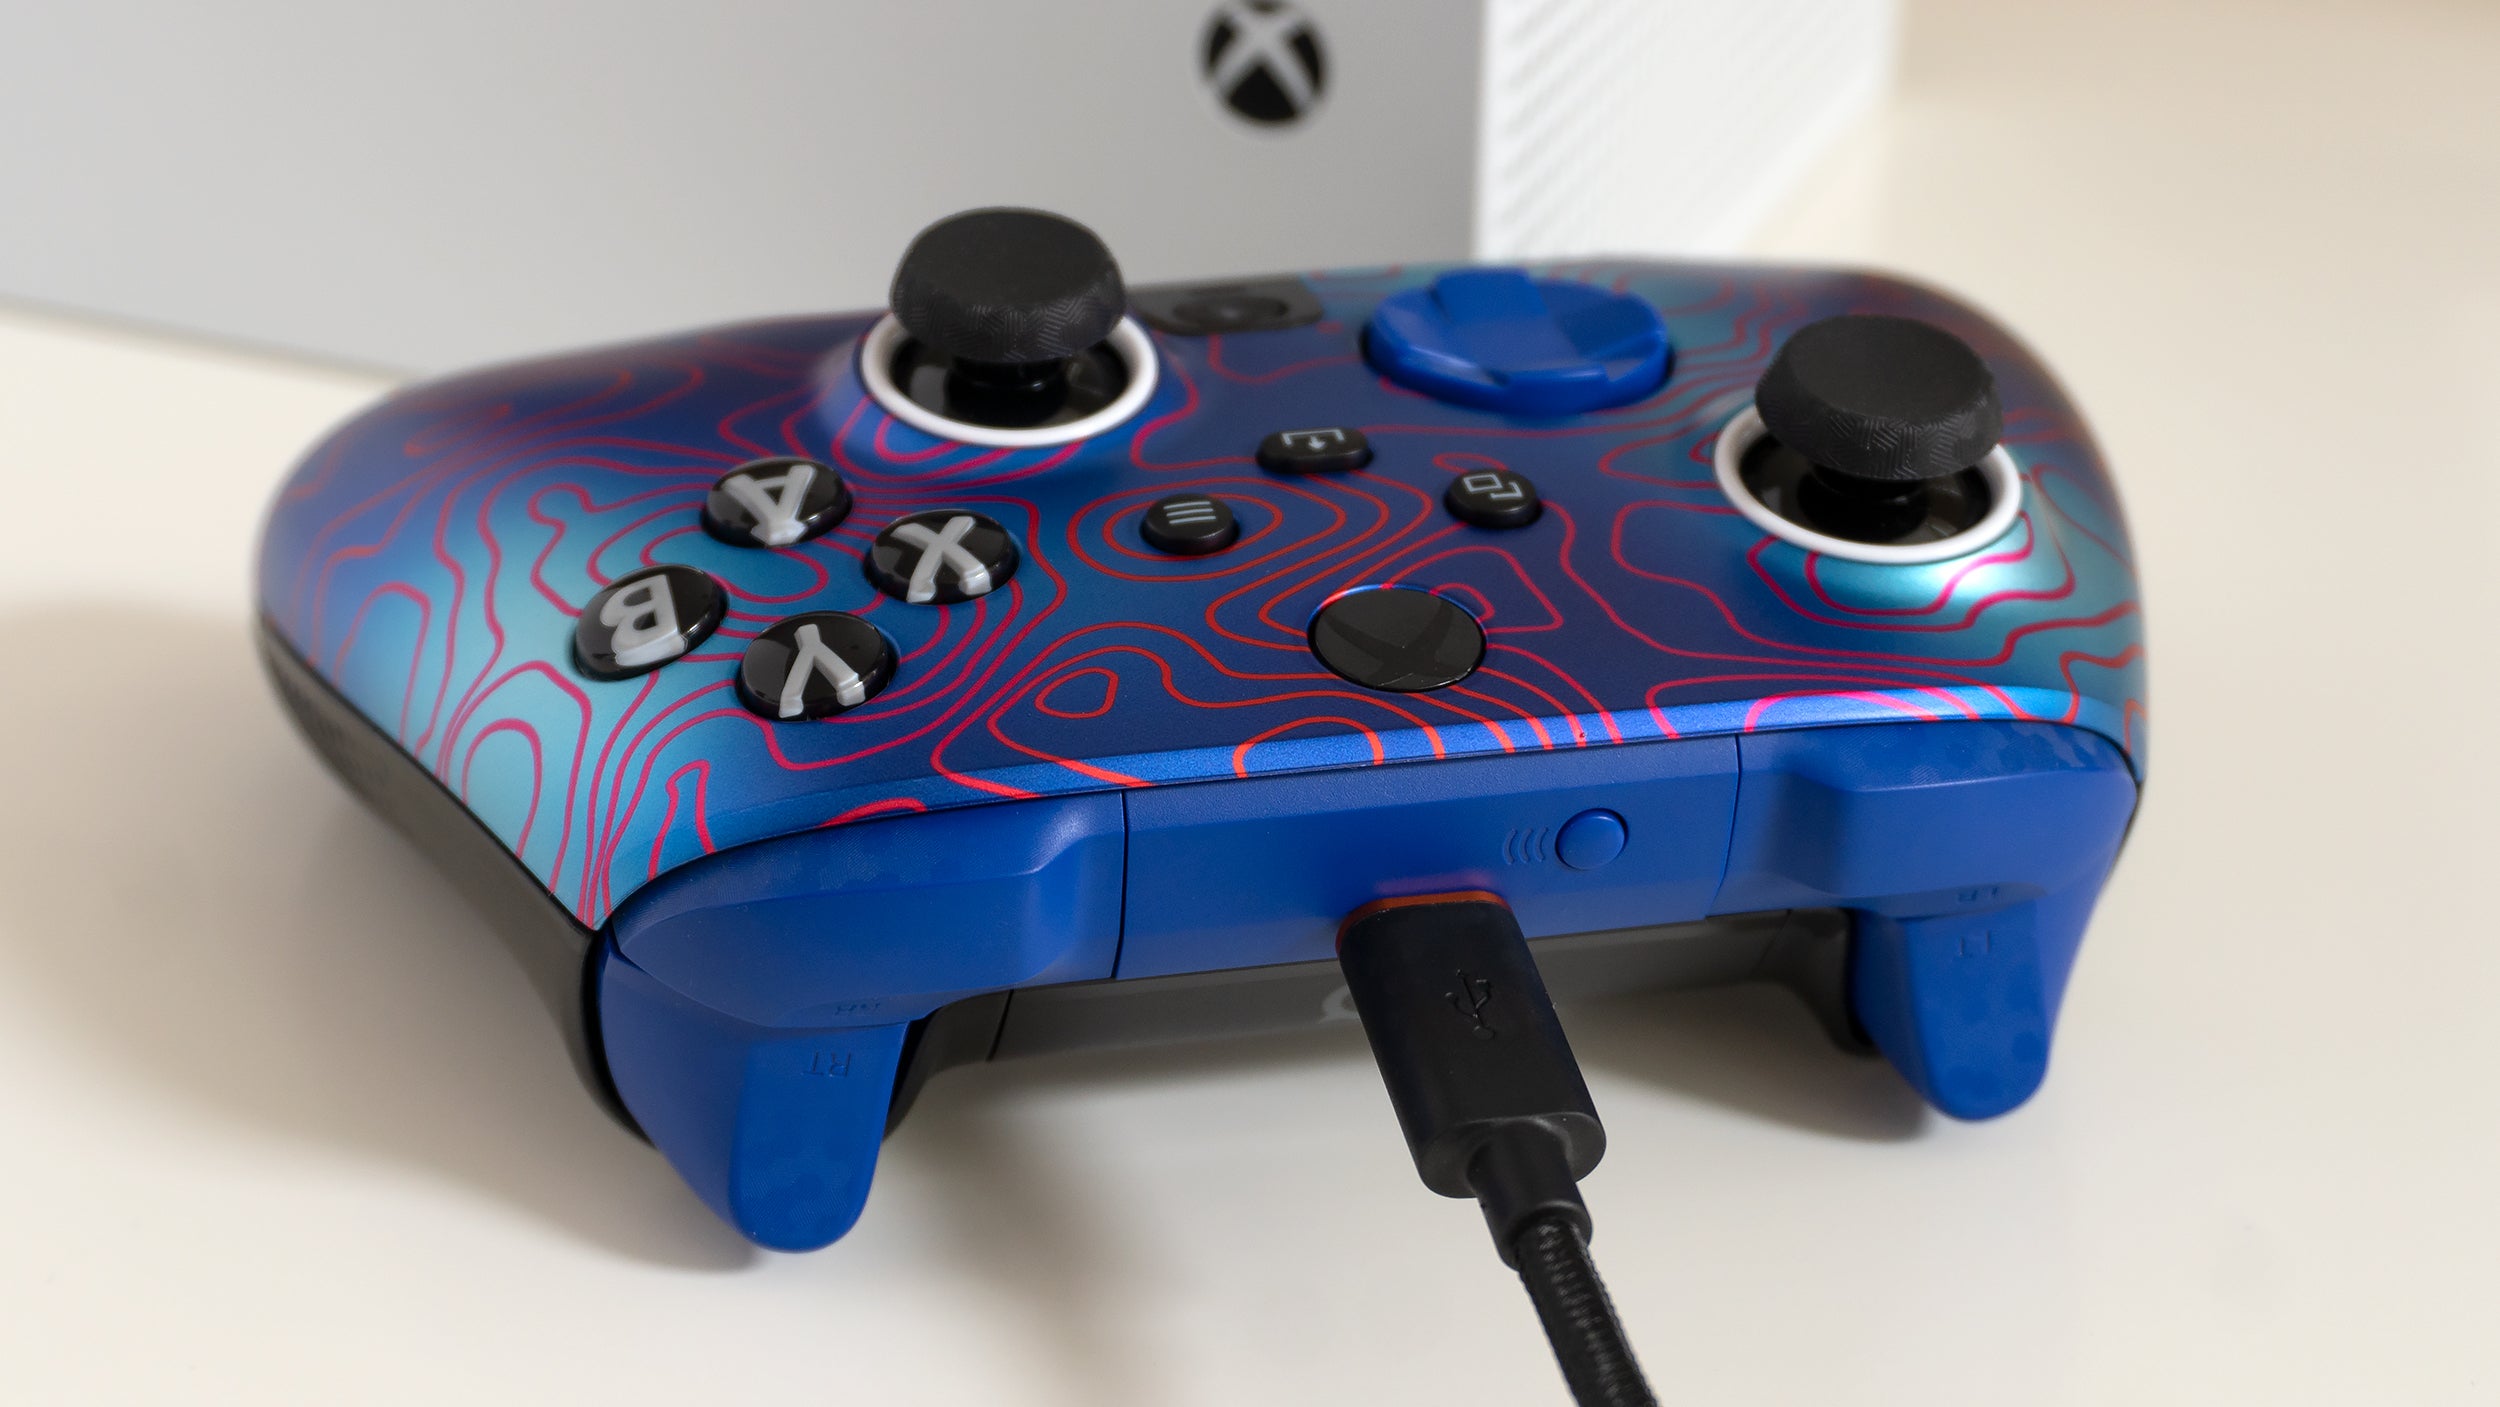 For competitive gamers who worry a wireless connection is introducing too much lag, a braided USB-C cable is included for a direct wired connection to the console. (Photo: Andrew Liszewski - Gizmodo)